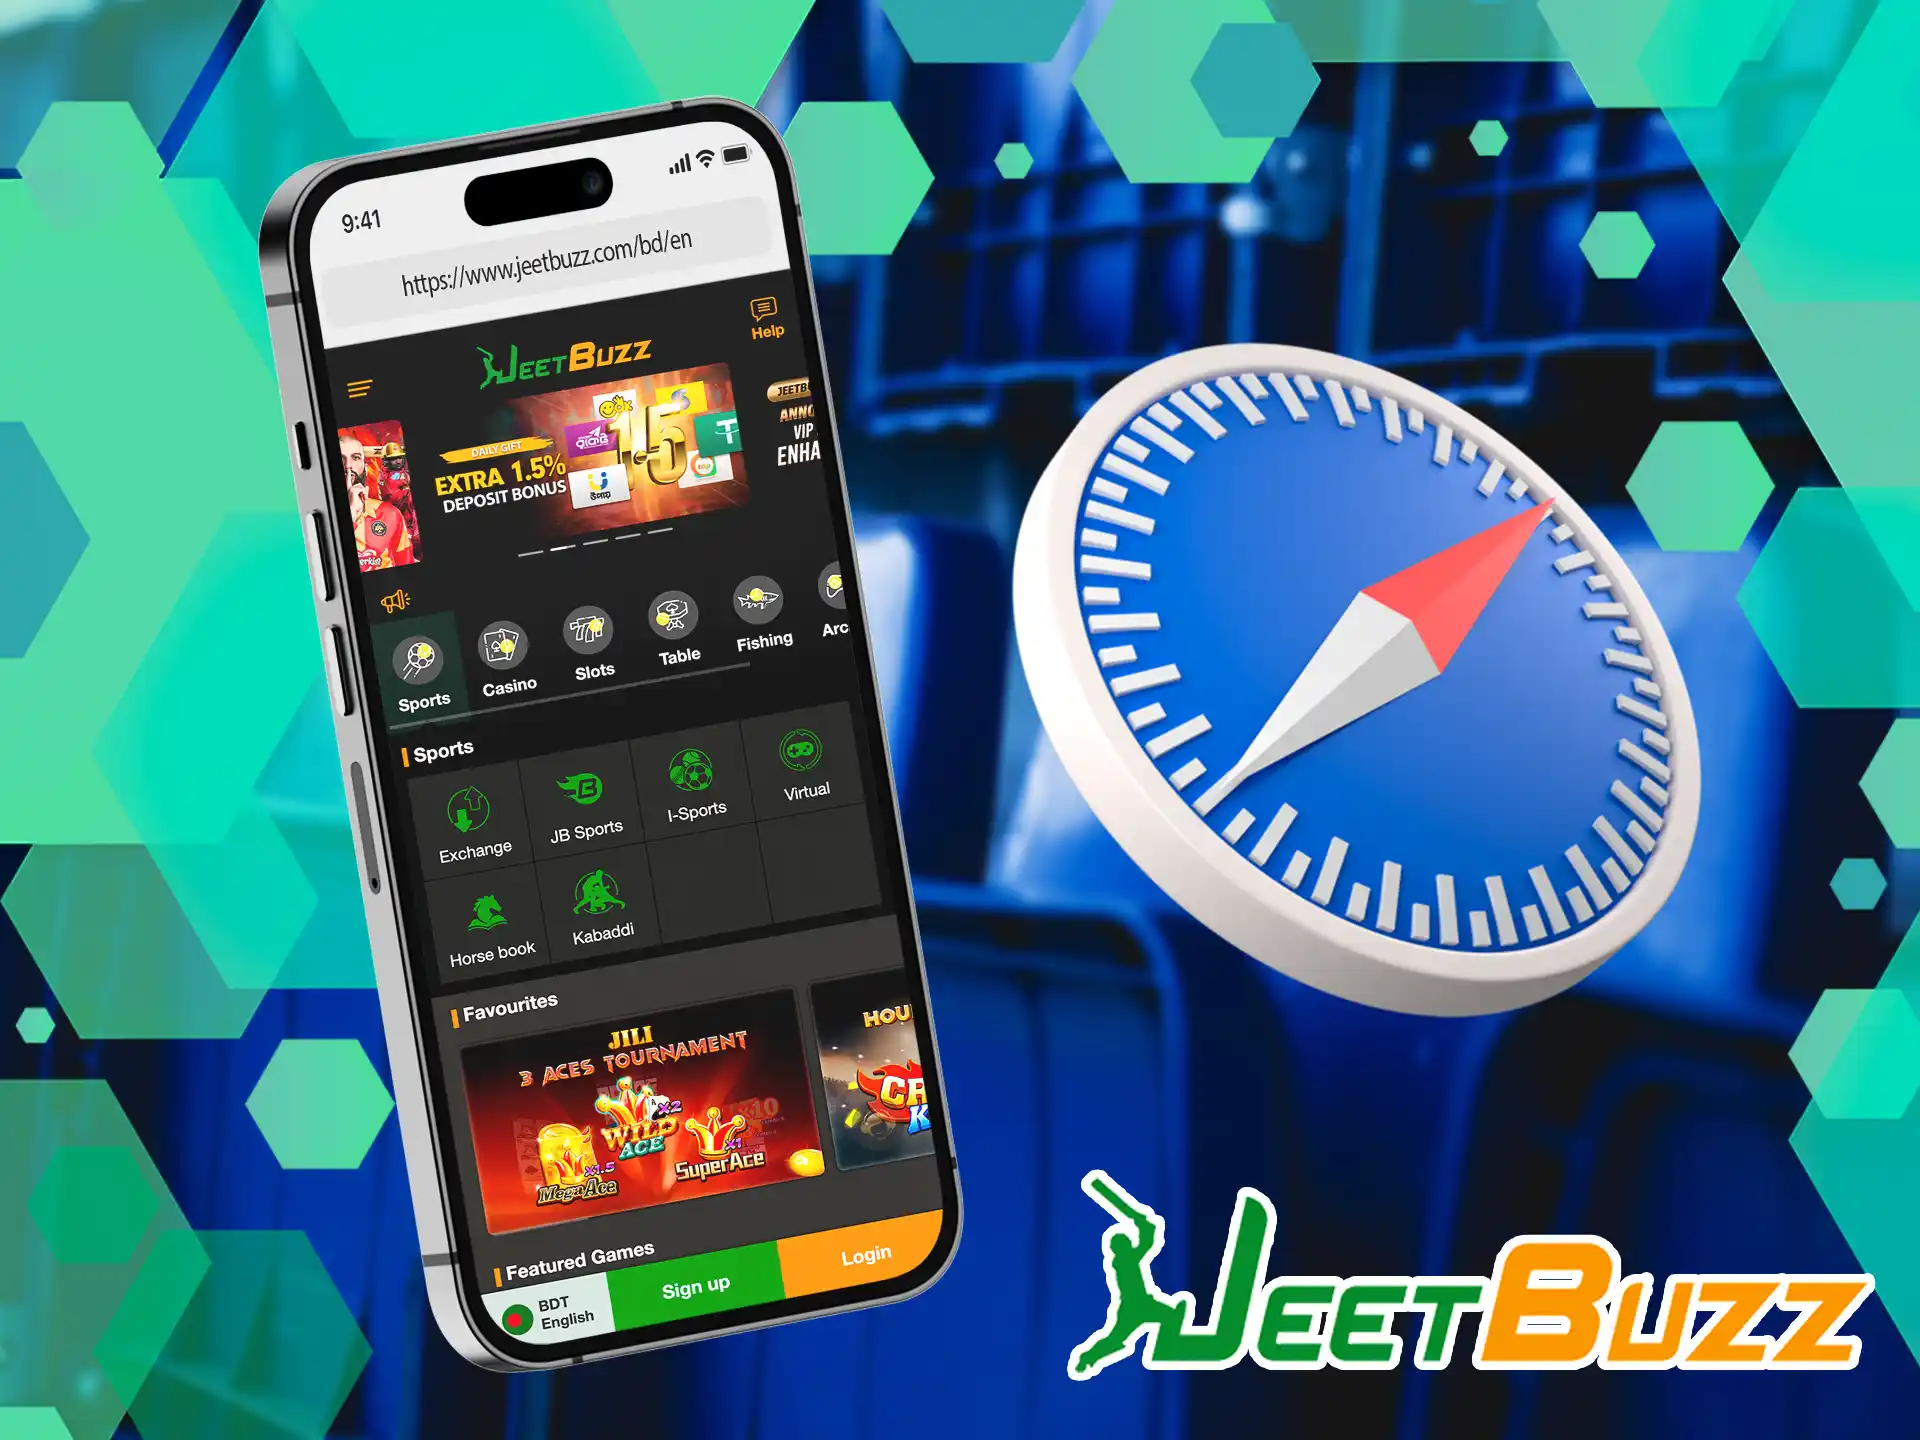 If you can't install the JeetBuzz software for whatever reason, this special version of the app will help you, it's compatible with most devices.